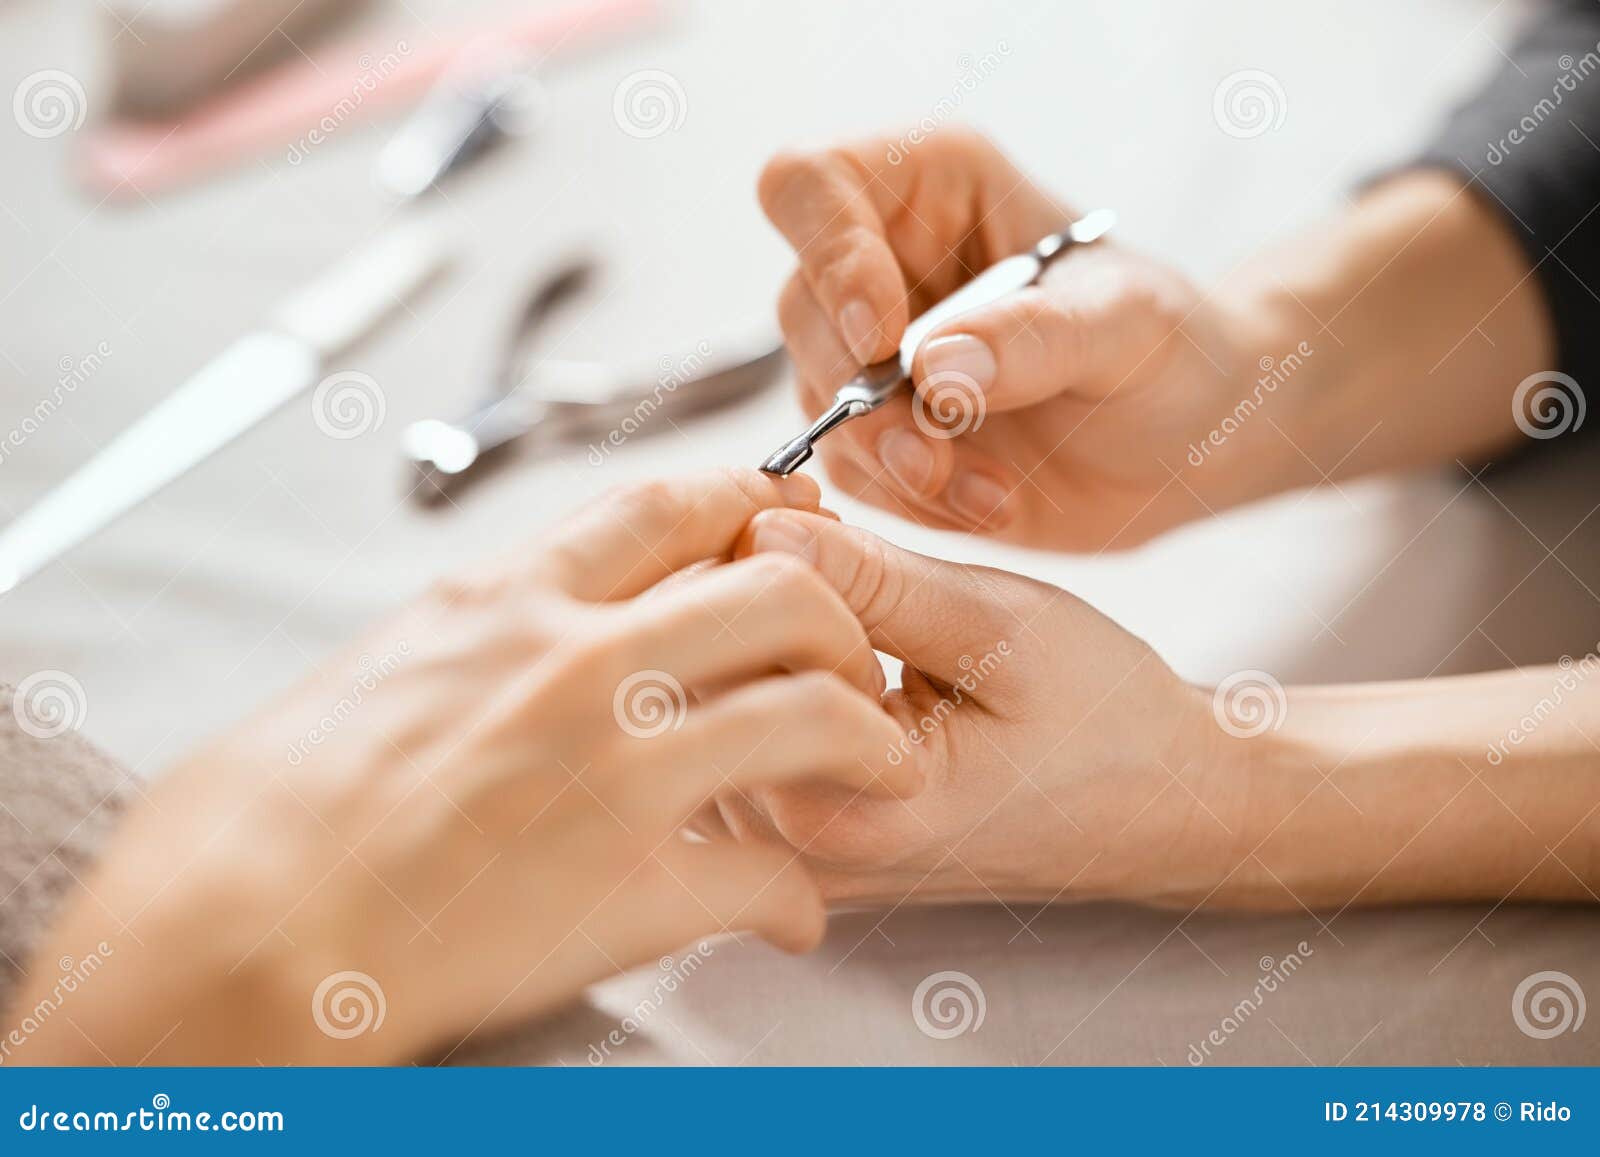 beautician using cuticle pusher on woman hand